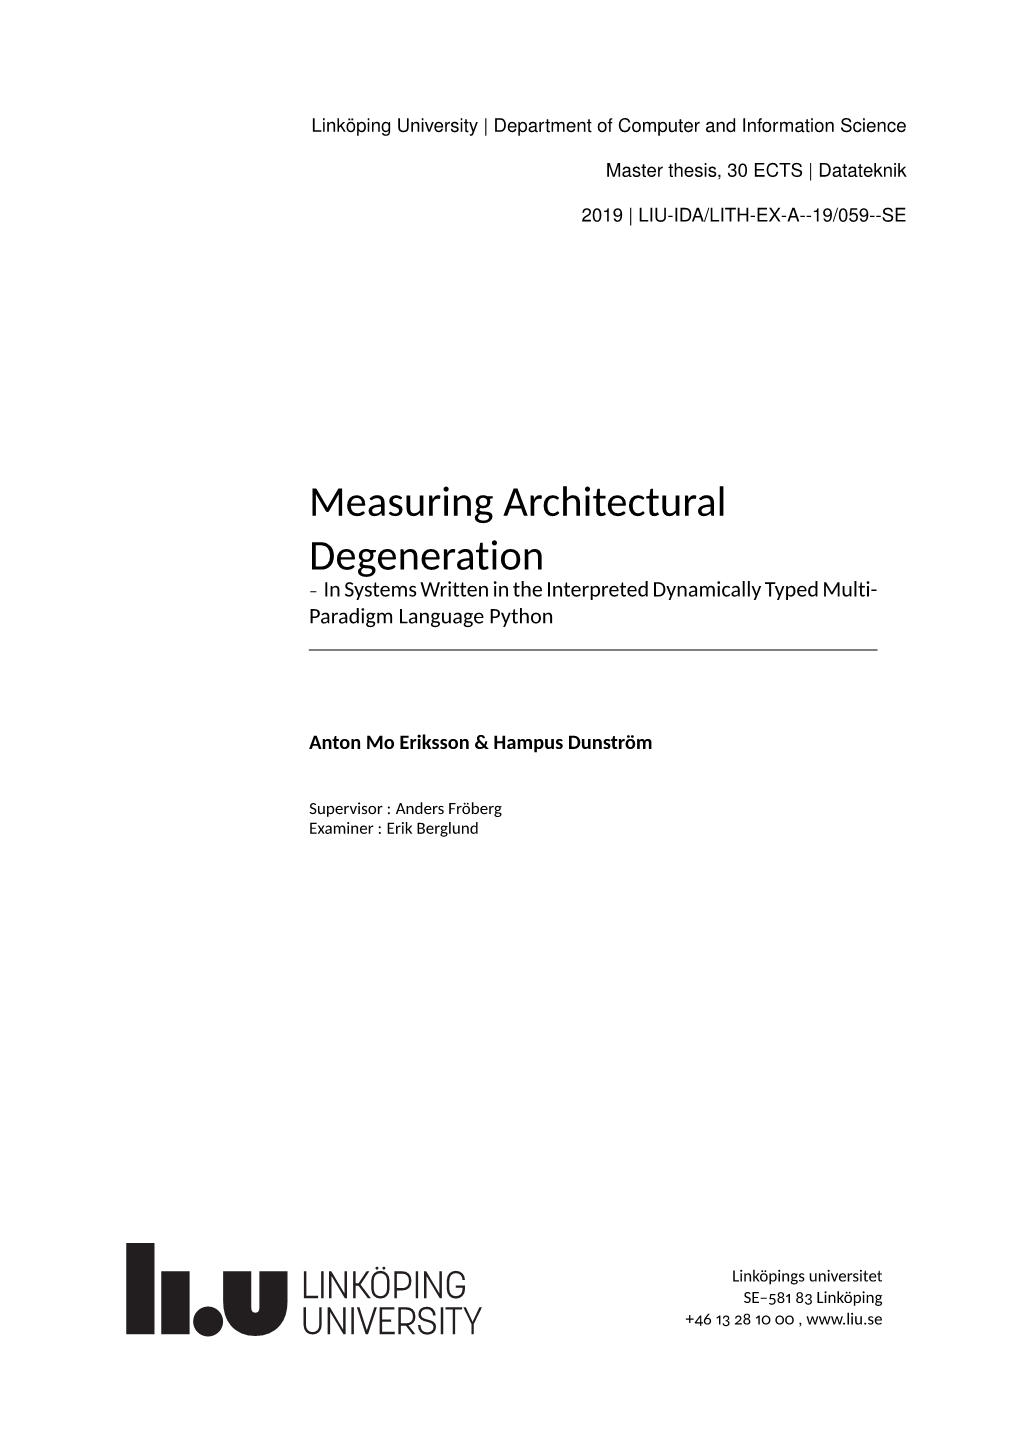 Measuring Architectural Degeneration – in Systems Written in the Interpreted Dynamically Typed Multi- Paradigm Language Python